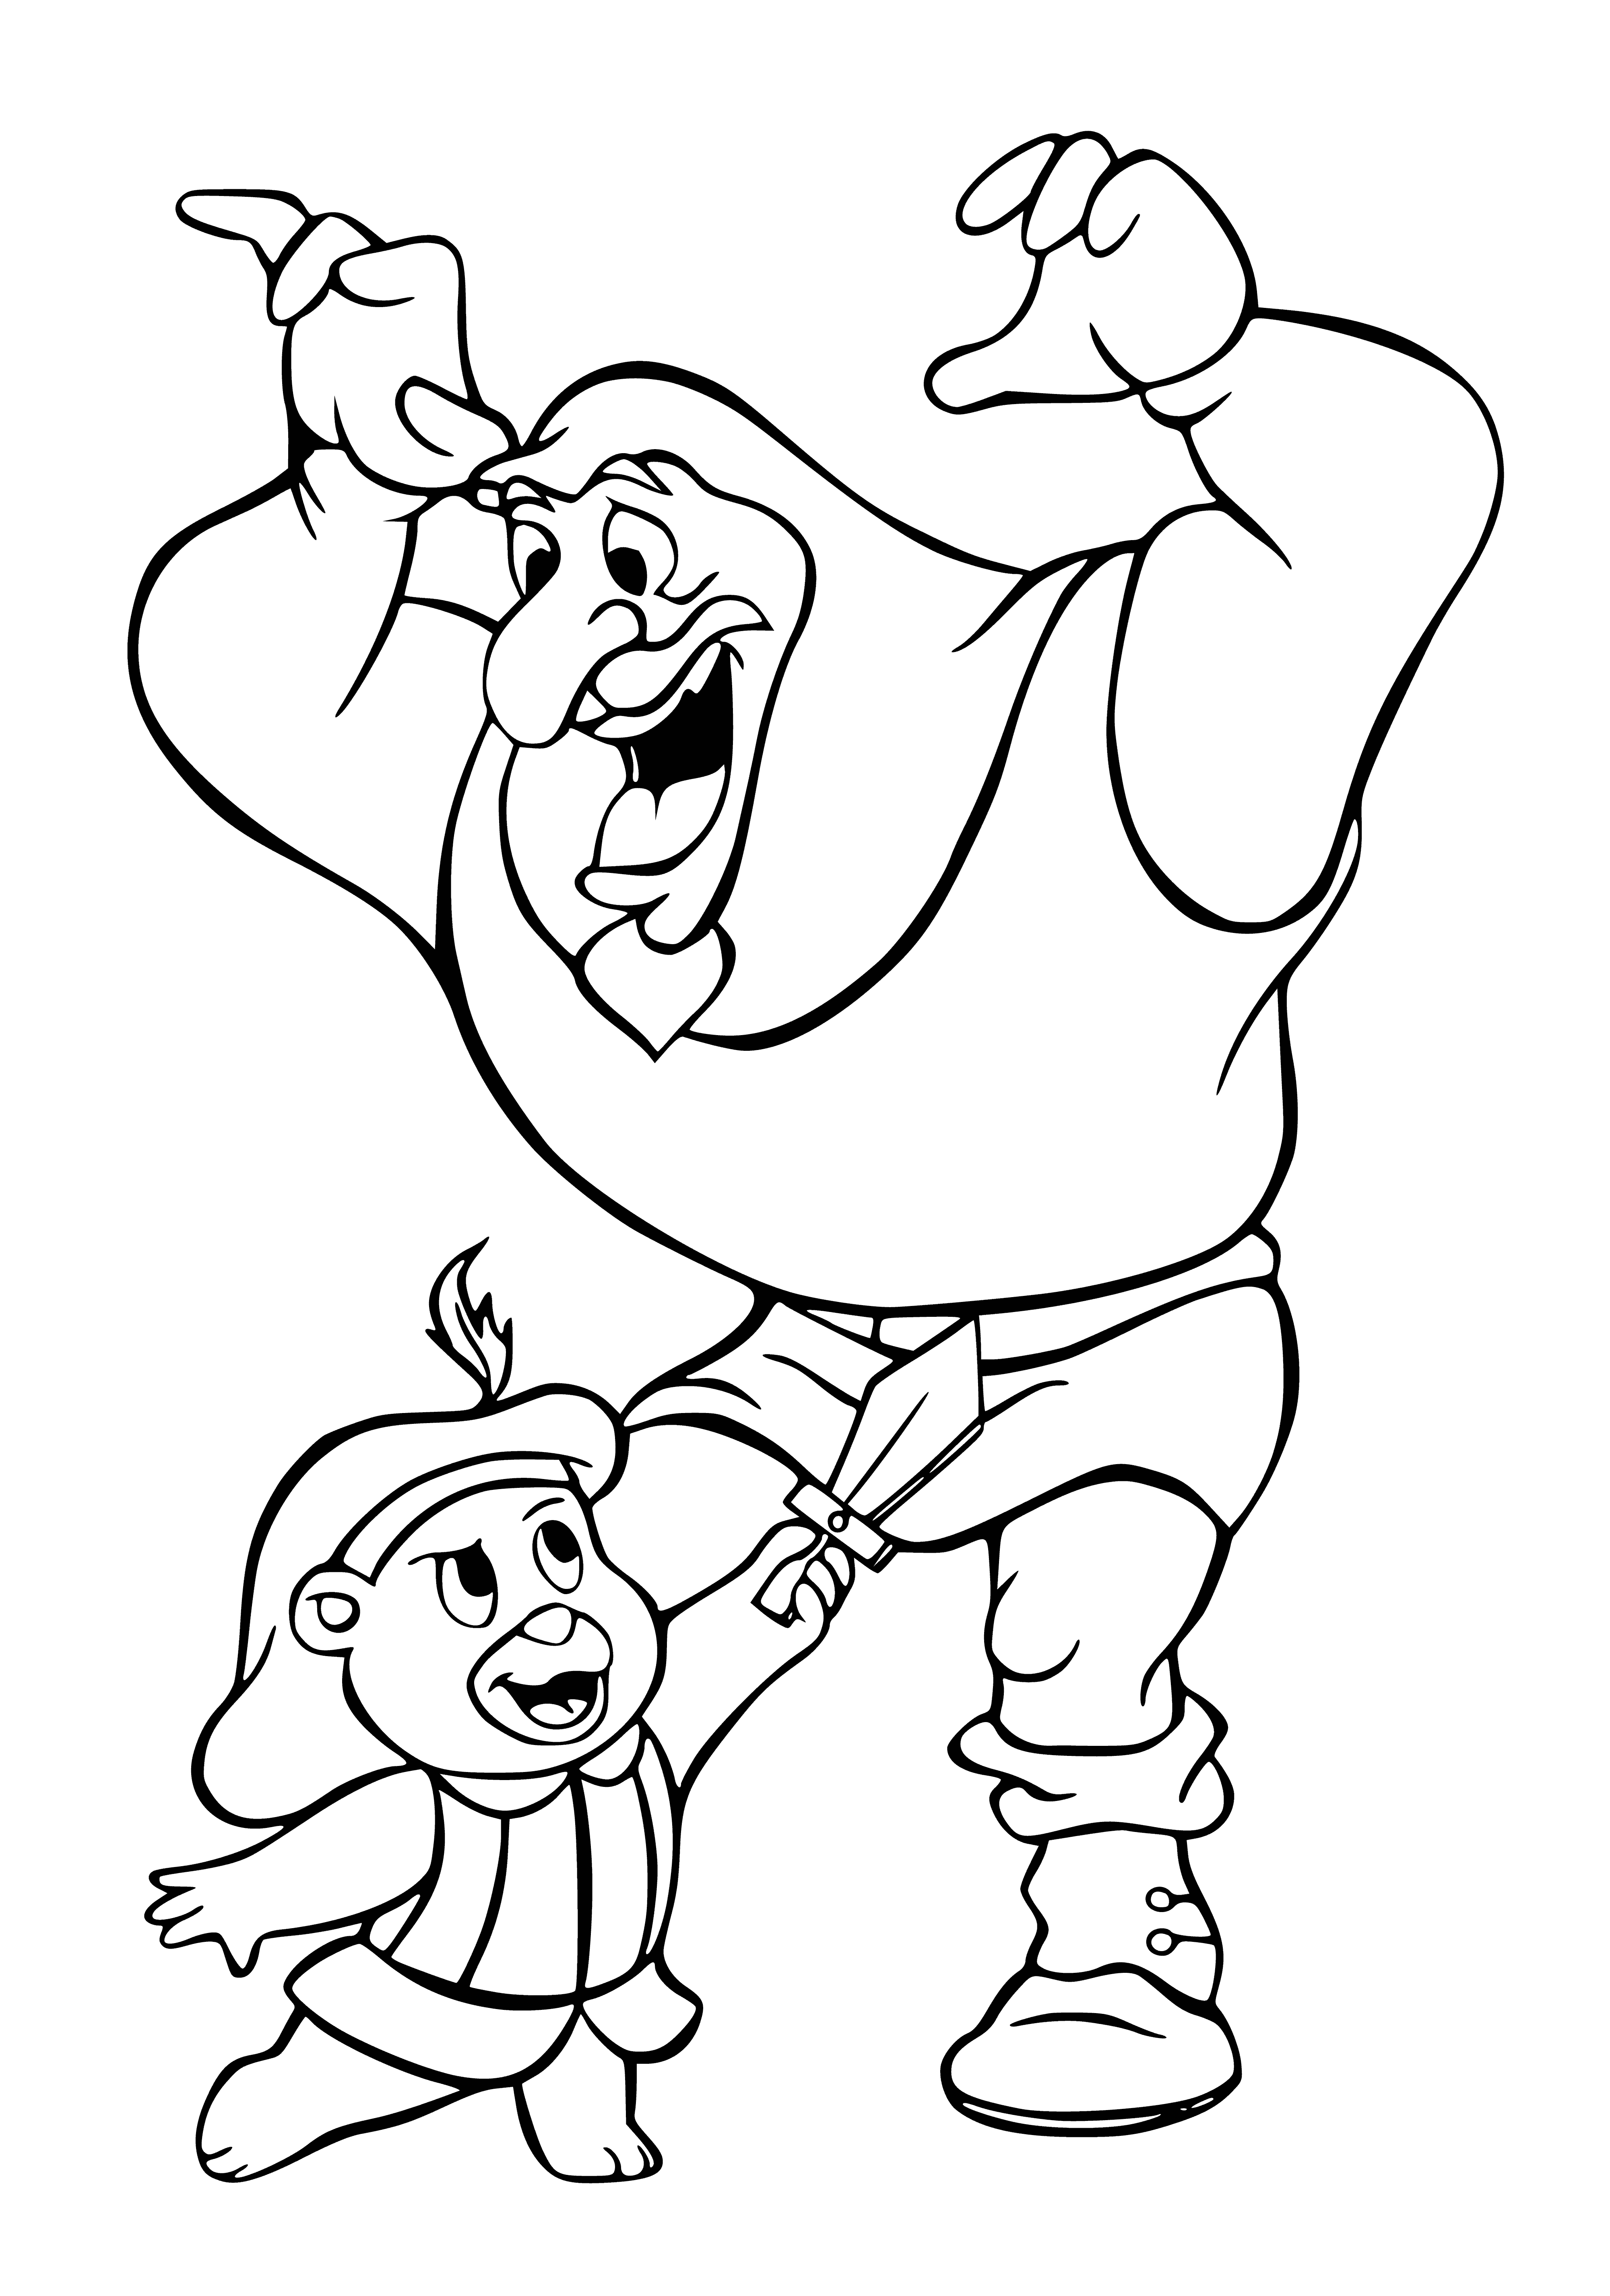 coloring page: The Gummi Bears are a friendly group of small bears who live in the forest and enjoy honey.